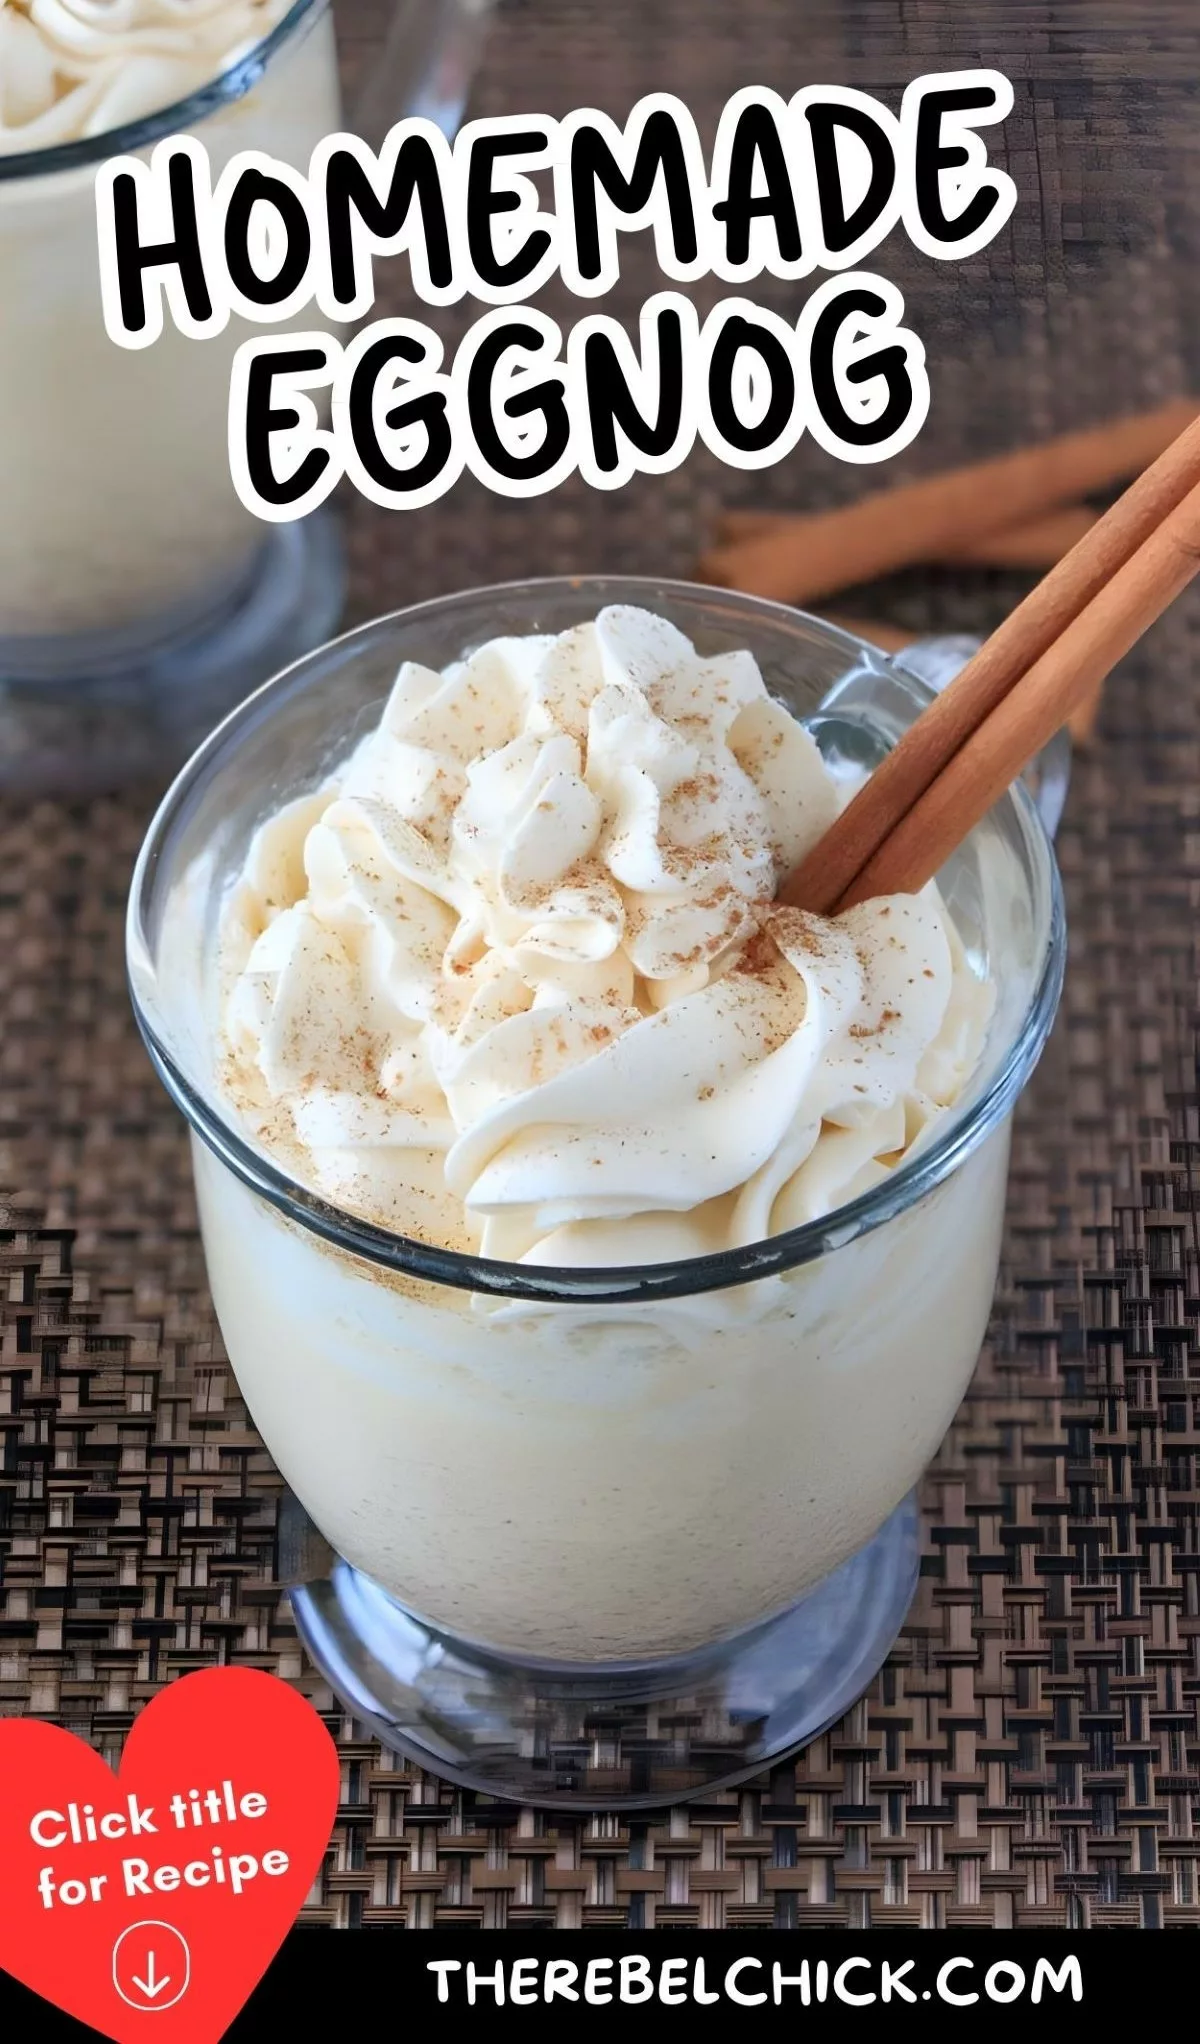 Eggnog in a glass with whipped cream on top, sprinkled with cinnamon and garnished with cinnamon sticks